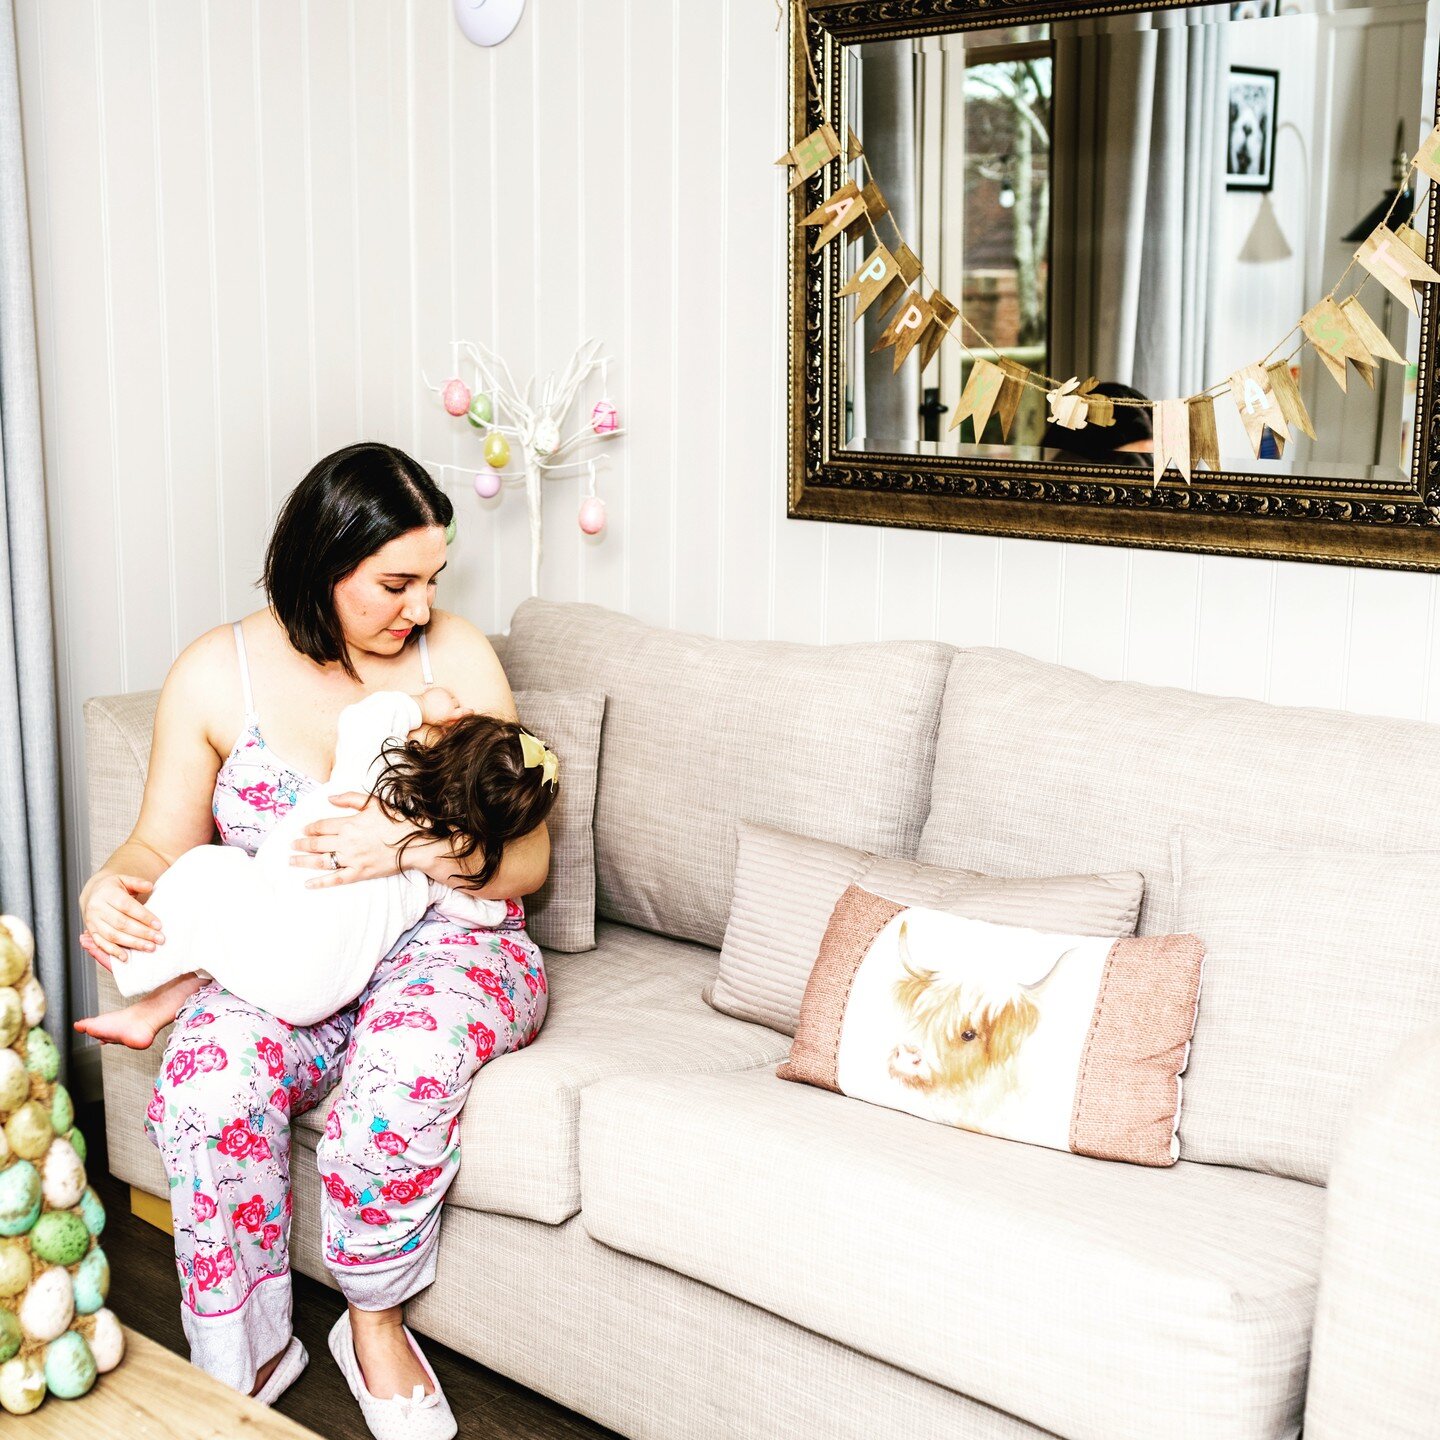 For comfortable breastfeeding this Easter time with family at home...The price range for Ubere Mama's breastfeeding clothing varies, offering a selection of items to accommodate different budgets. The garments are priced from &pound;45 to &pound;65 R